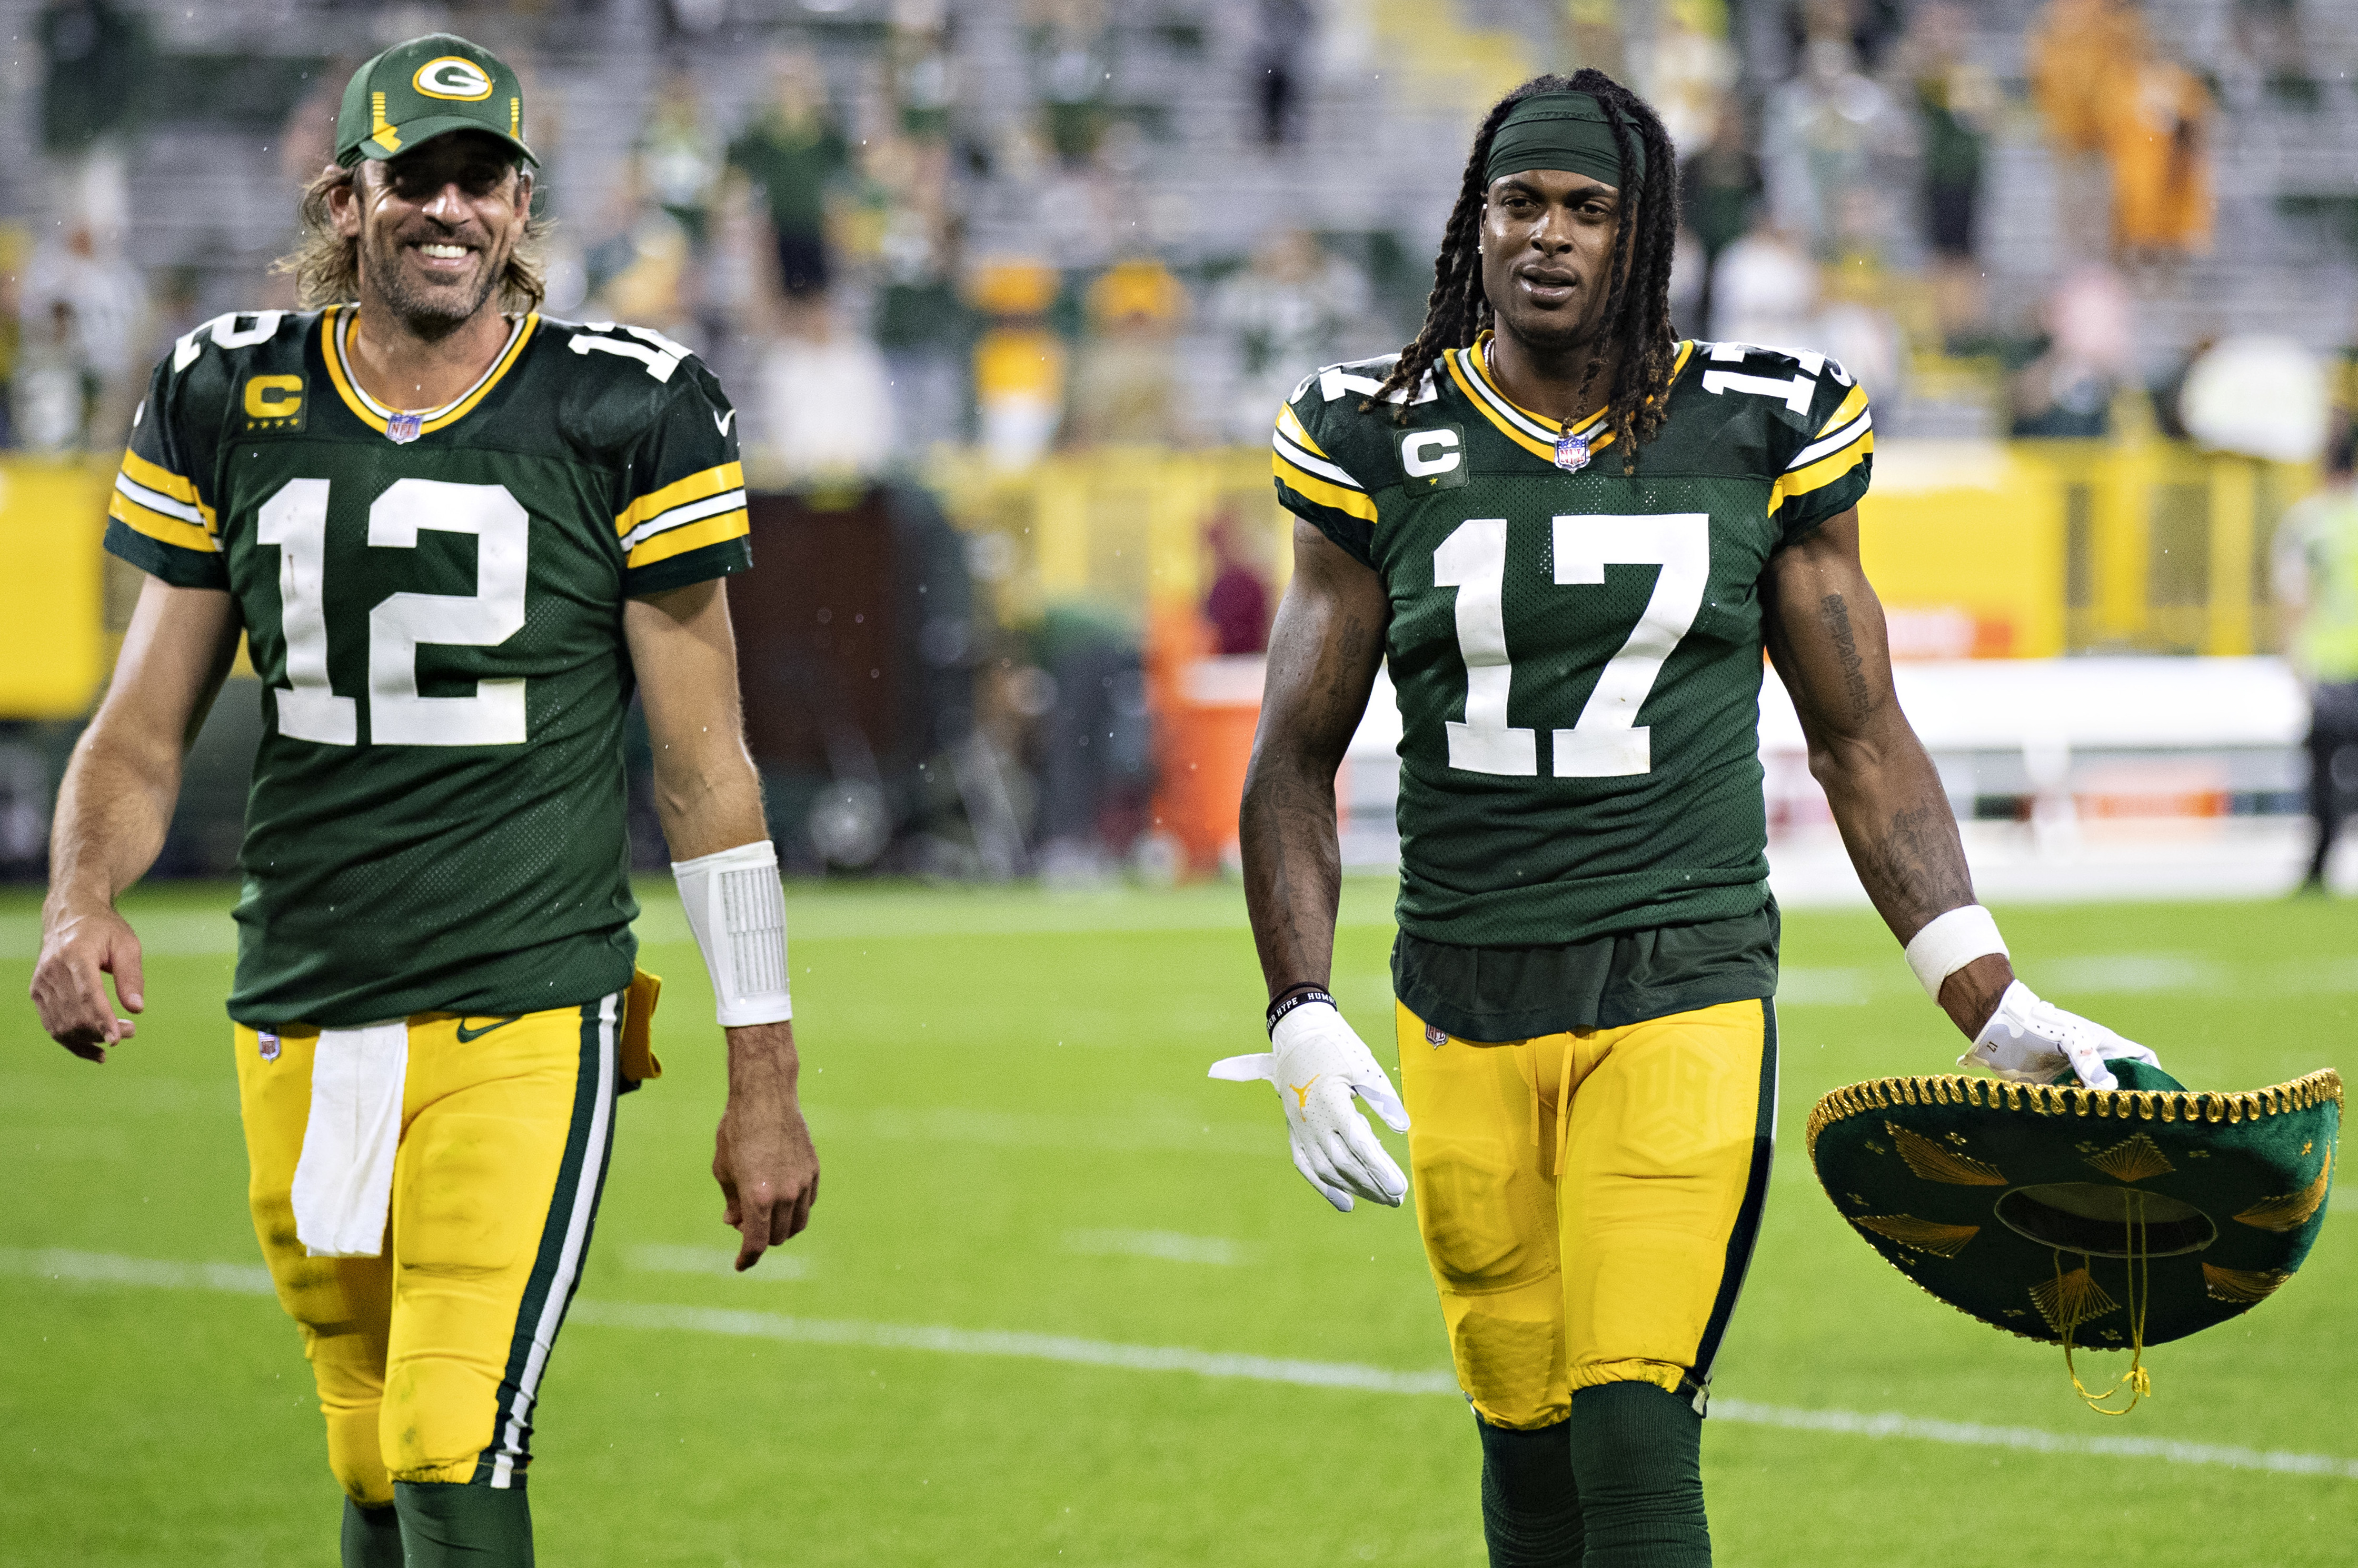 Packers stars Aaron Rodgers and Davante Adams